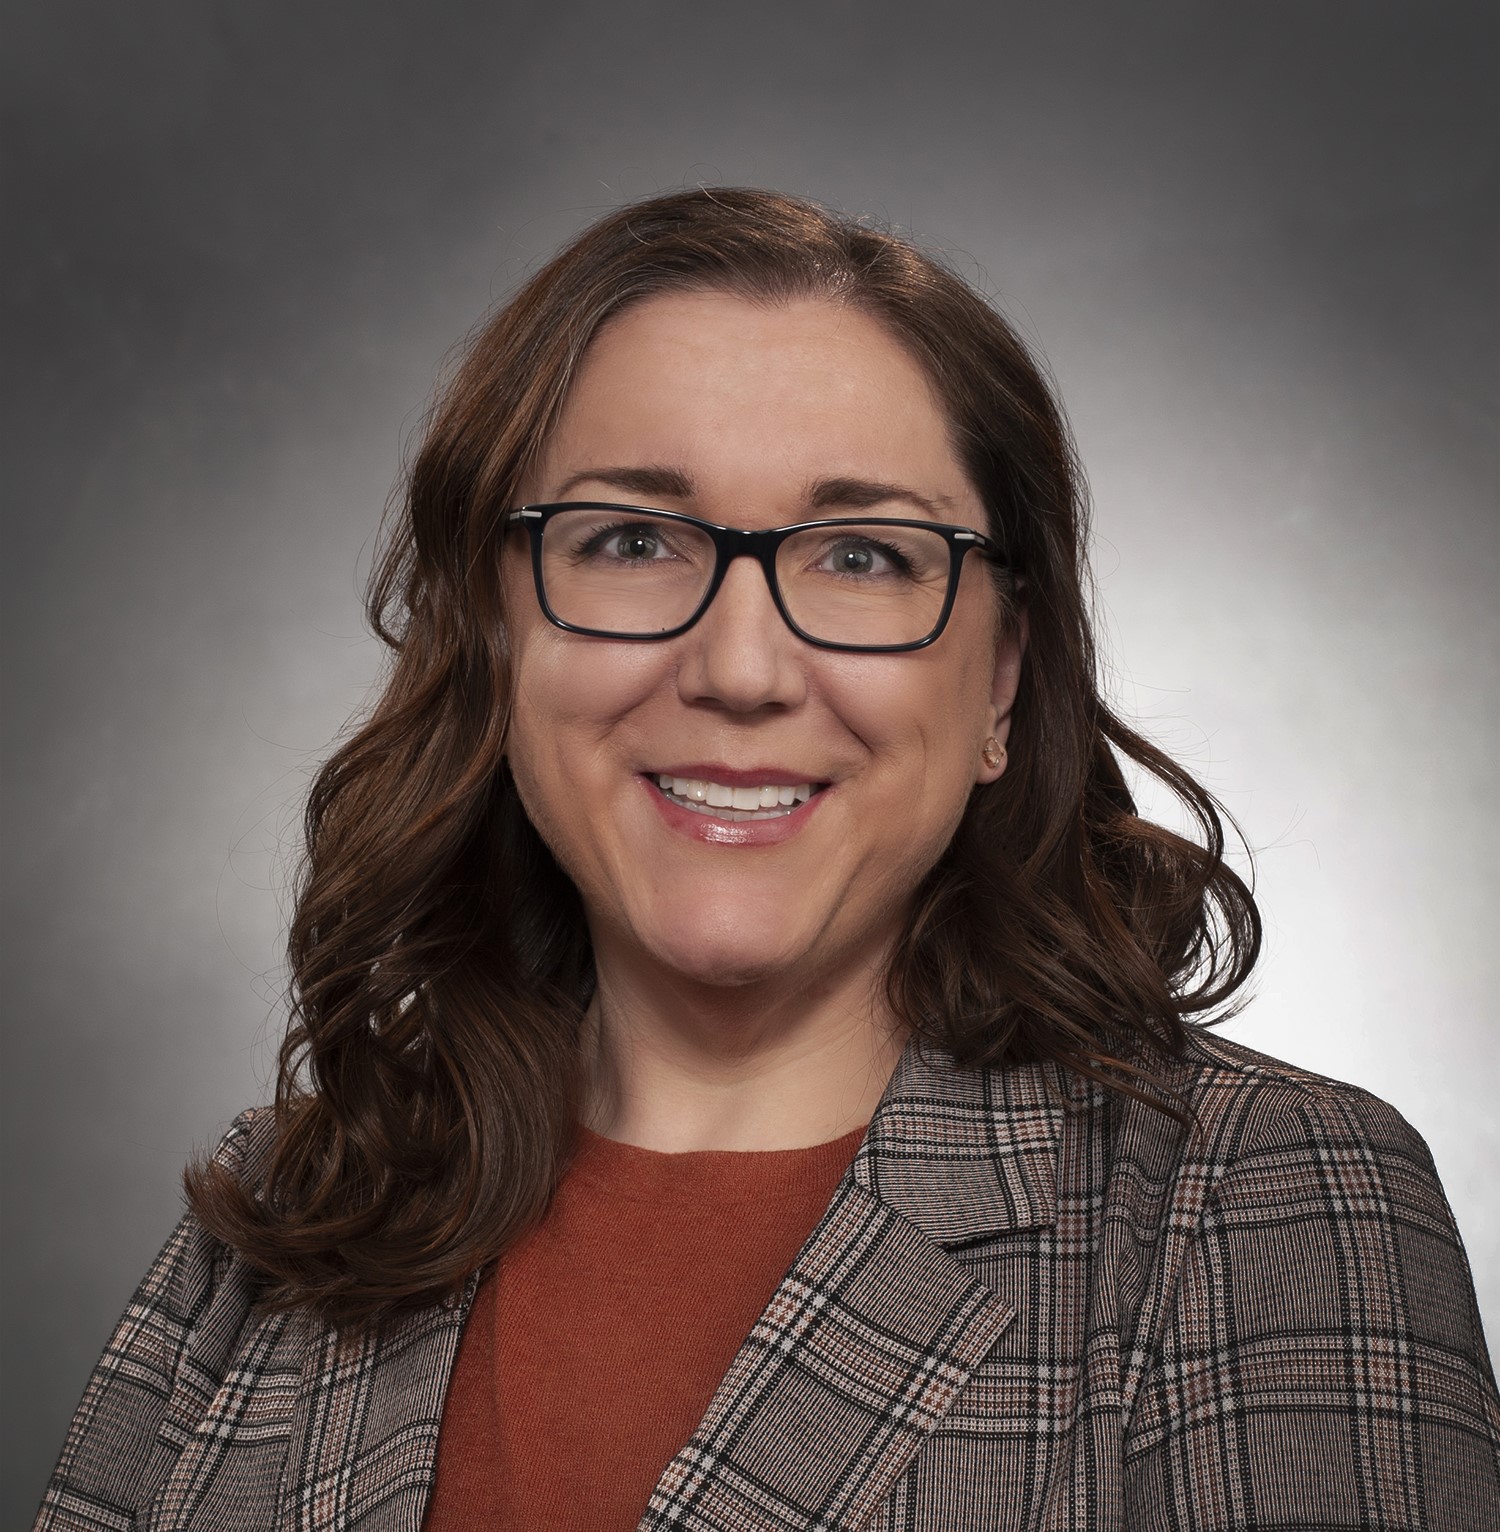 Dr. Brown’s project, titled Multiple Sclerosis and Medical Assistance in Dying: A Qualitative Exploration of Patient and Family-Centered Care was the top-scored application of Establishment Grants within the field of socio-health research. (Photo courtesy of SHRF)